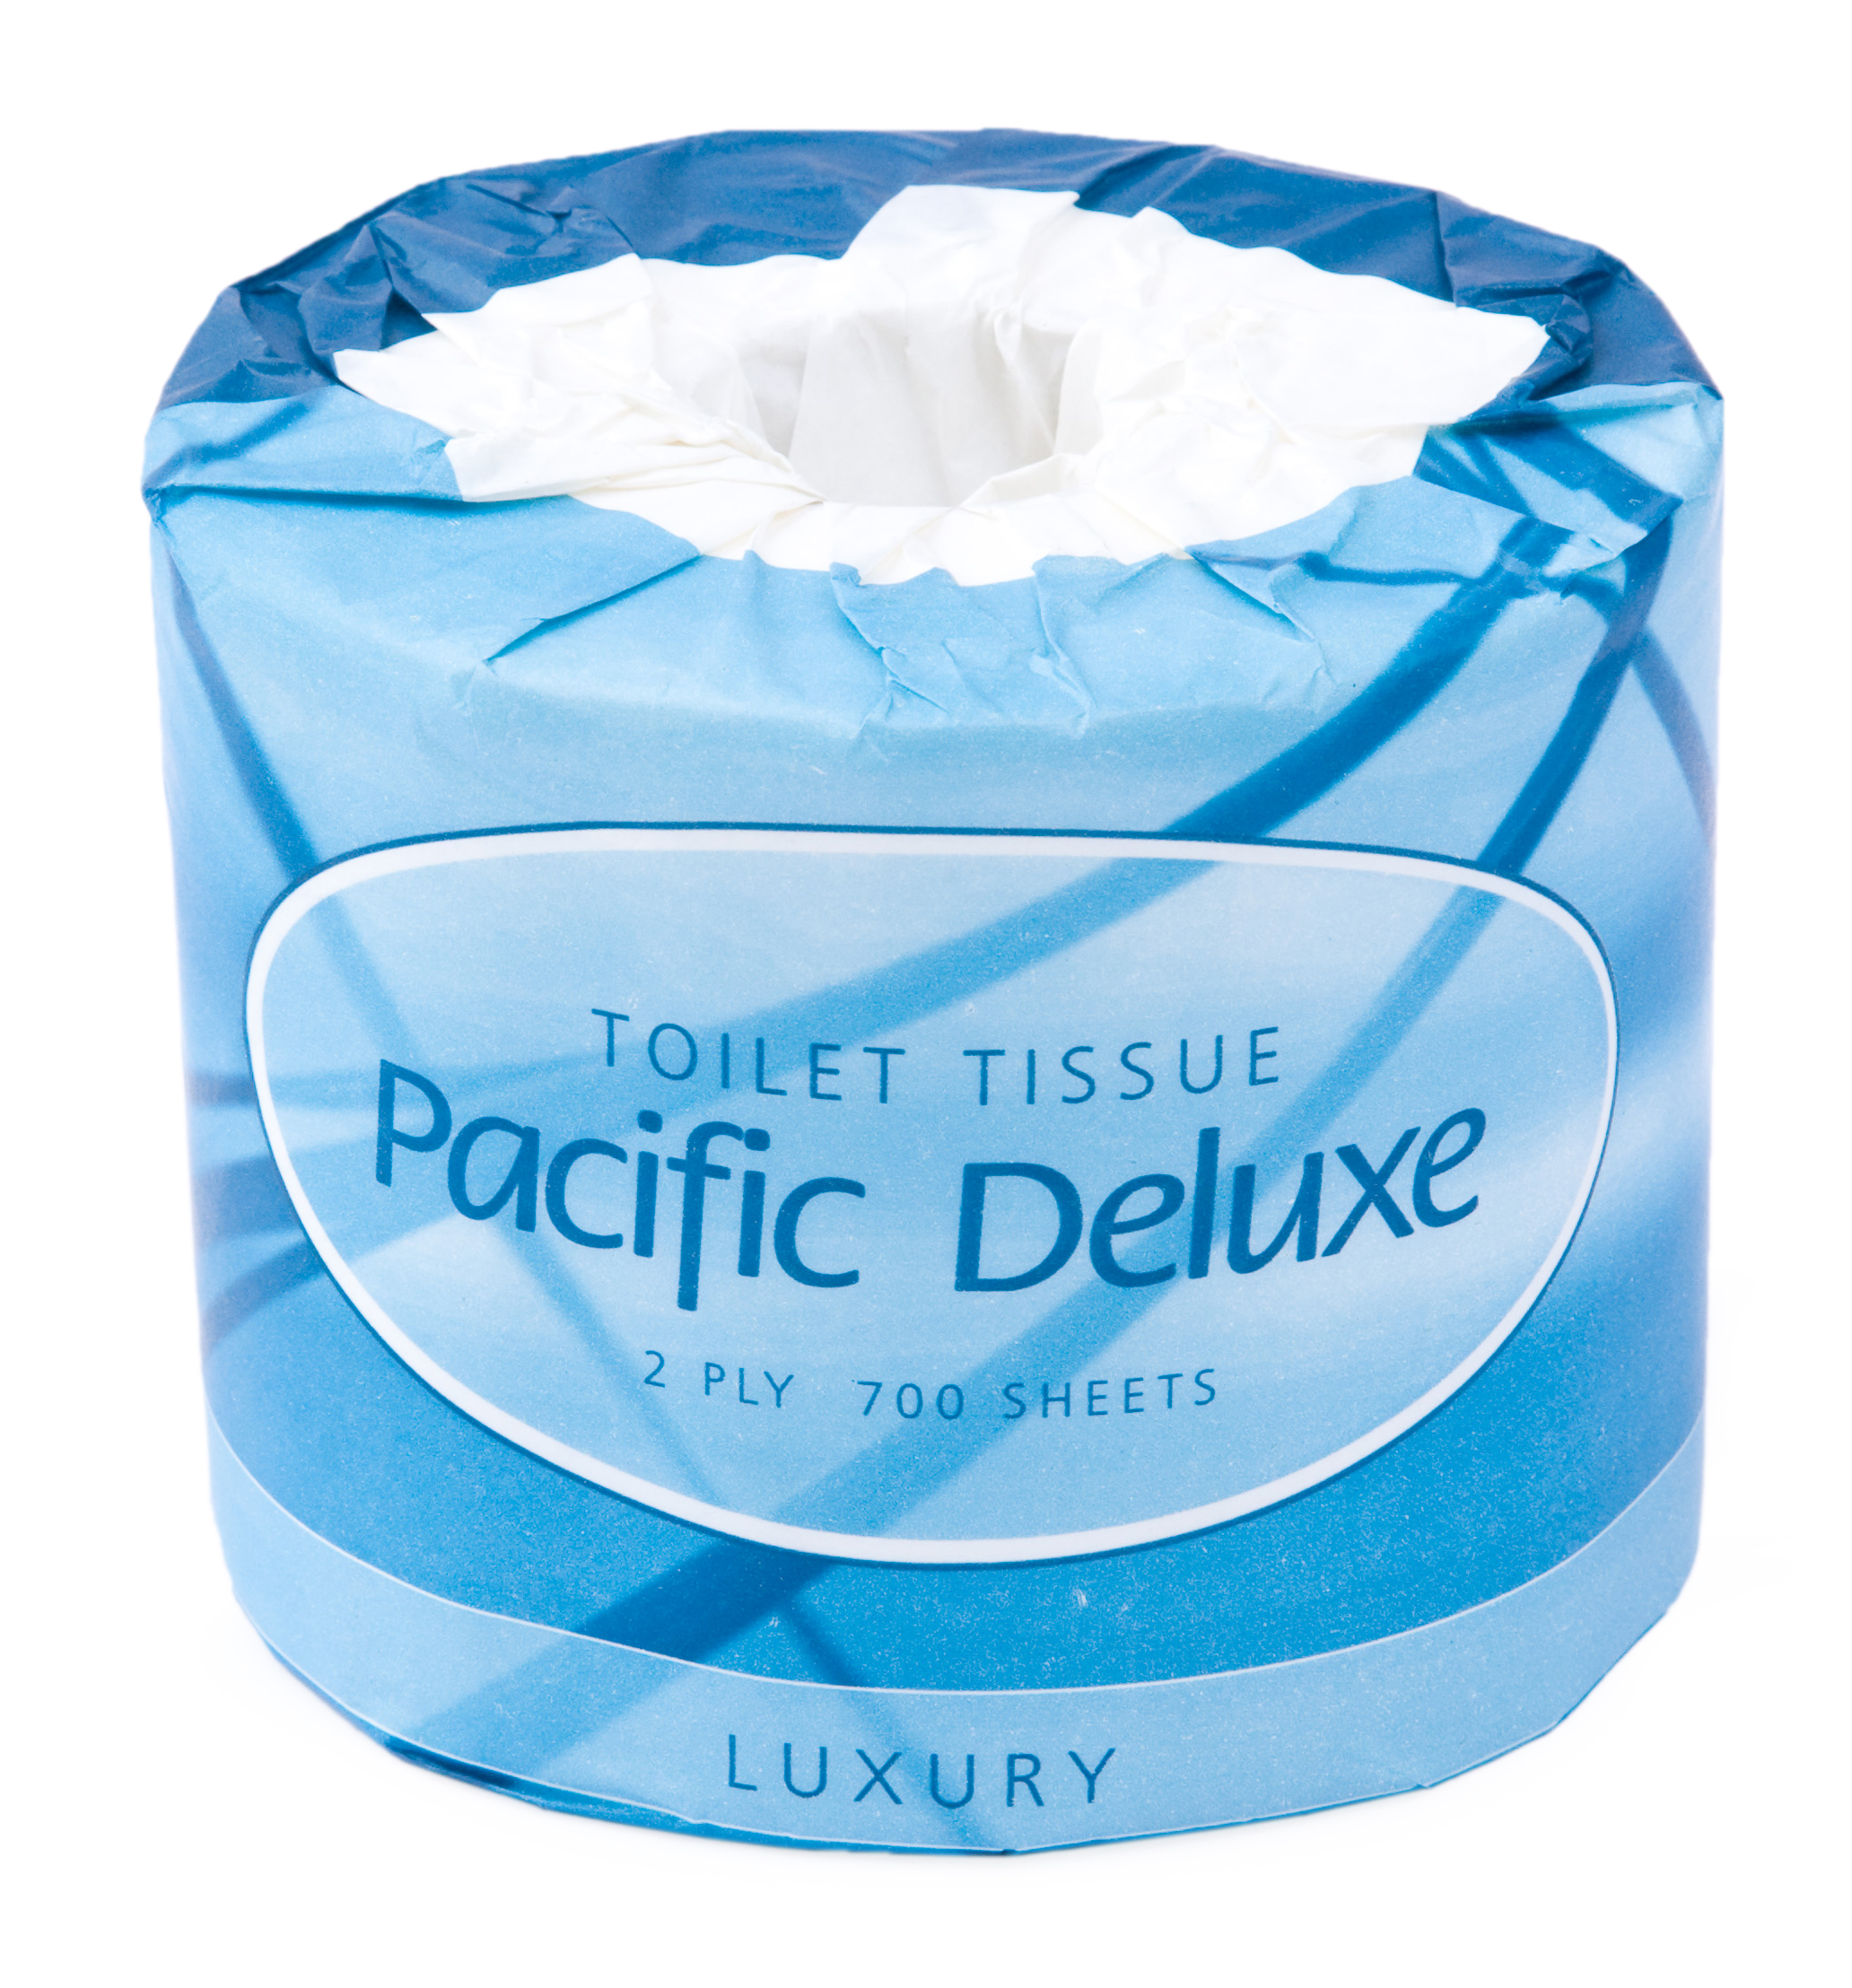 2 Ply Pacific Deluxe 700 Sheet Toilet Rolls Ladycare Services Ltd